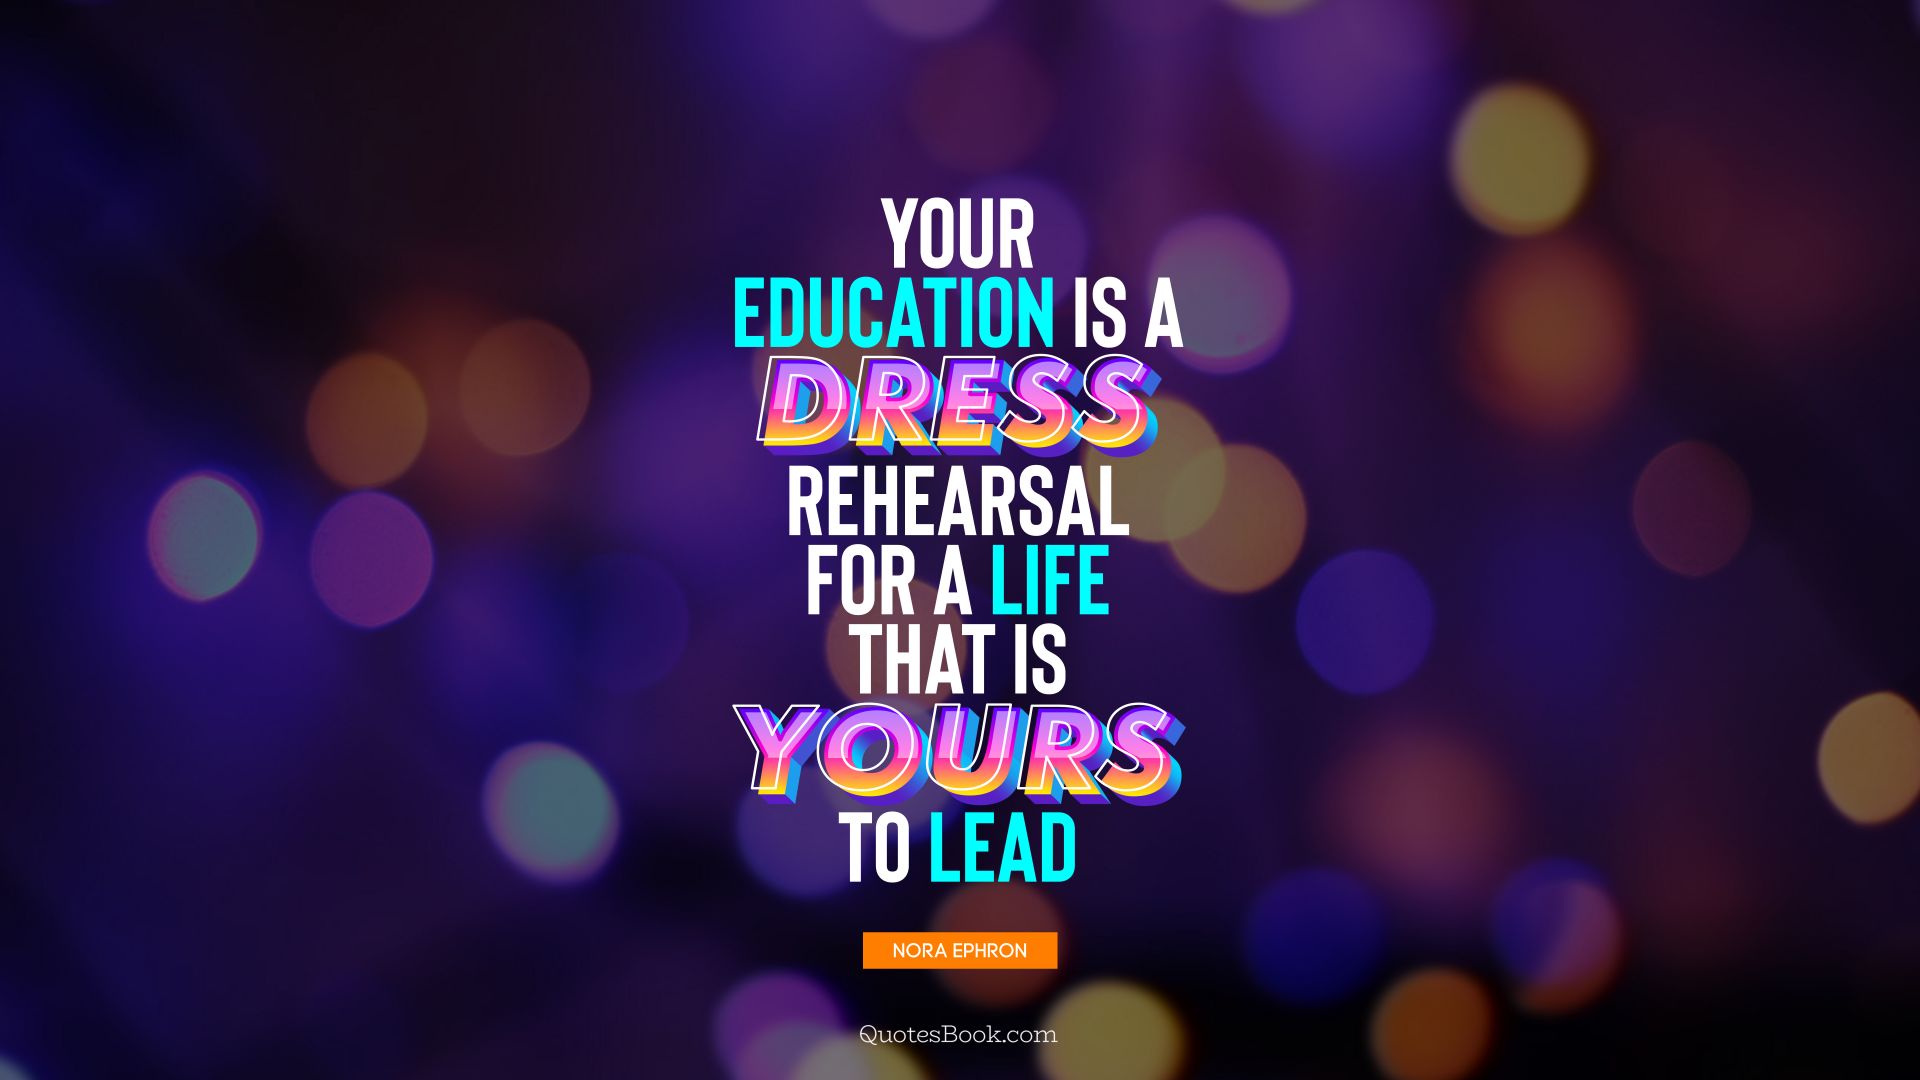 Your education is a dress rehearsal for a life that is yours to lead. - Quote by Nora Ephron